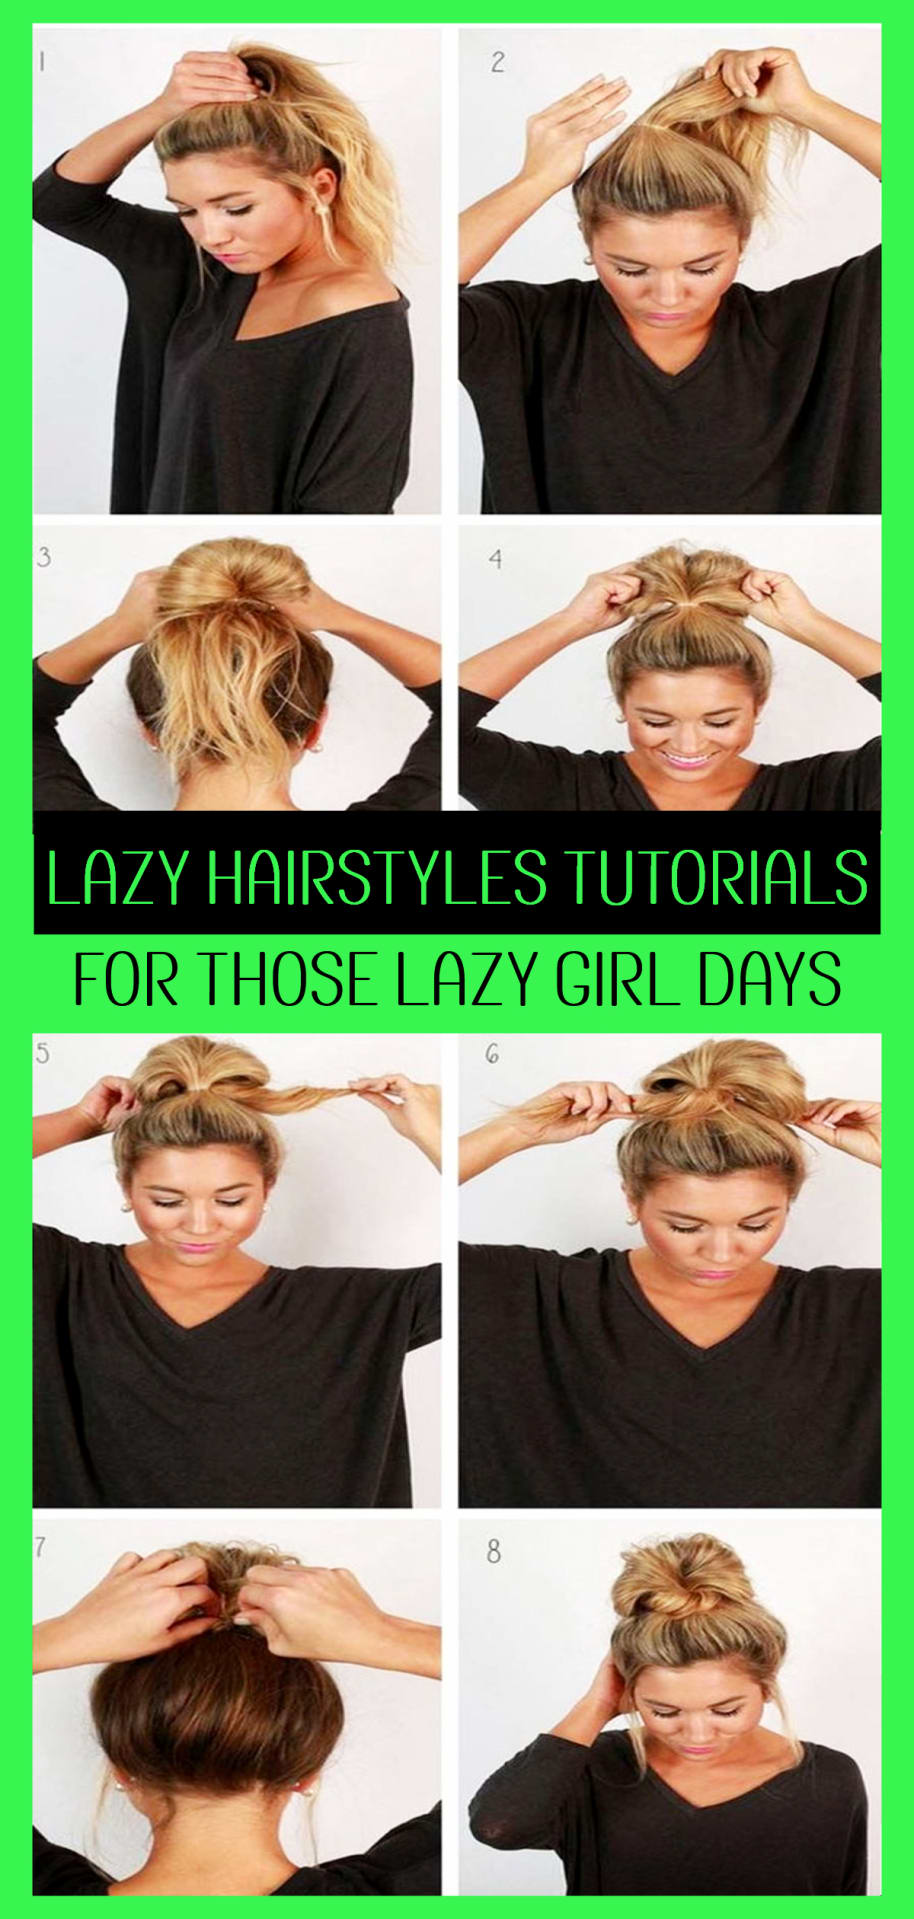 Lazy Hairstyles!  Quick messy lazy hairstyles for school or for work - easy messy bun hairstyles tutorials for lazy girls